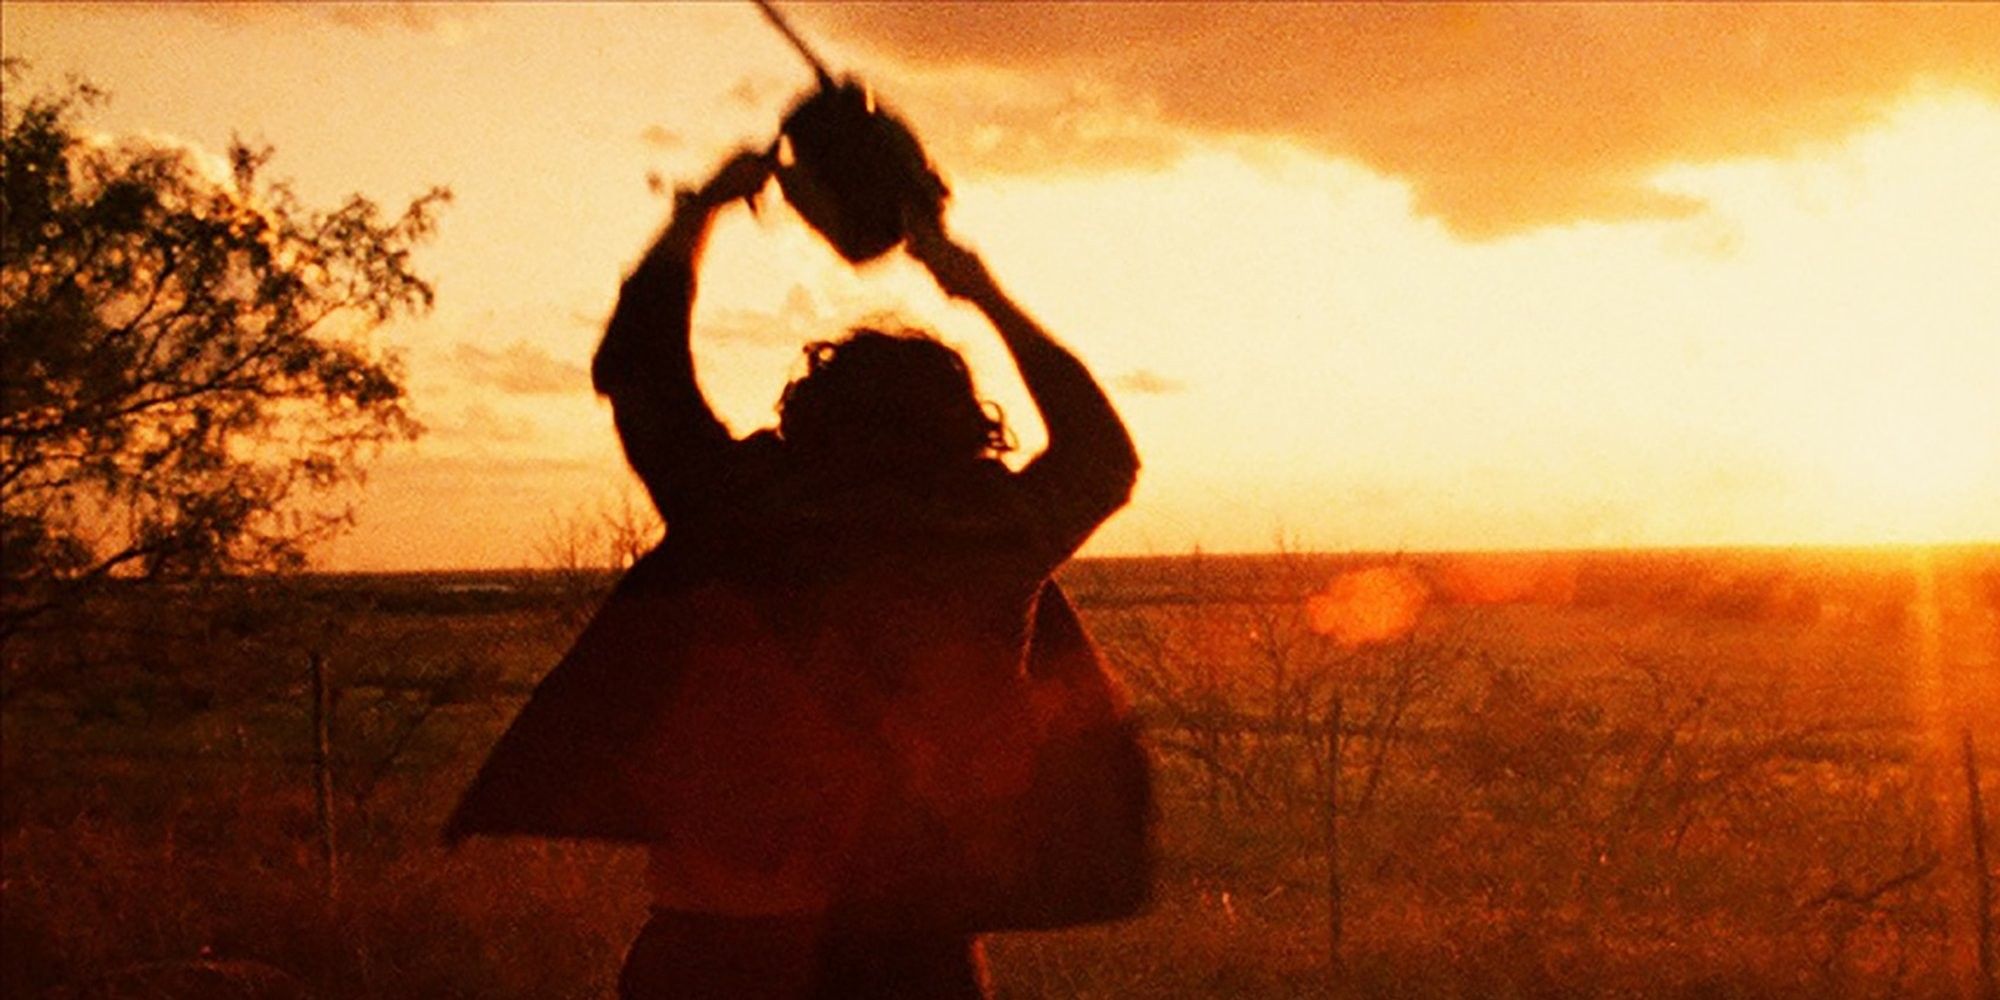 Leatherface standing in a field in The Texas Chainsaw Masscare